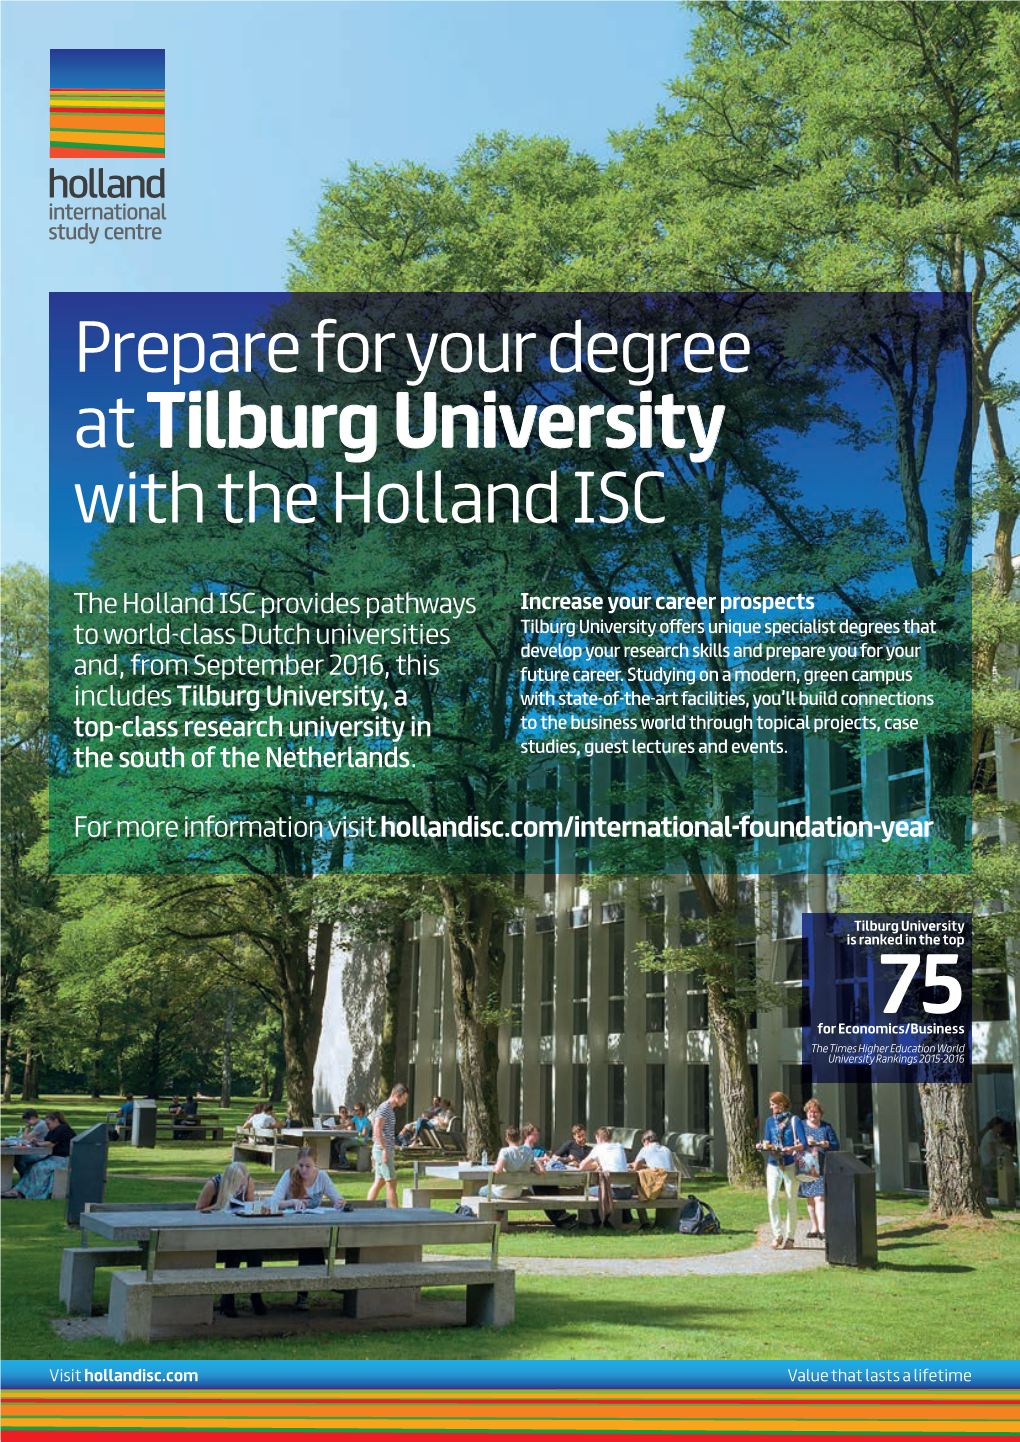 Prepare for Your Degree at Tilburg University with the Holland ISC